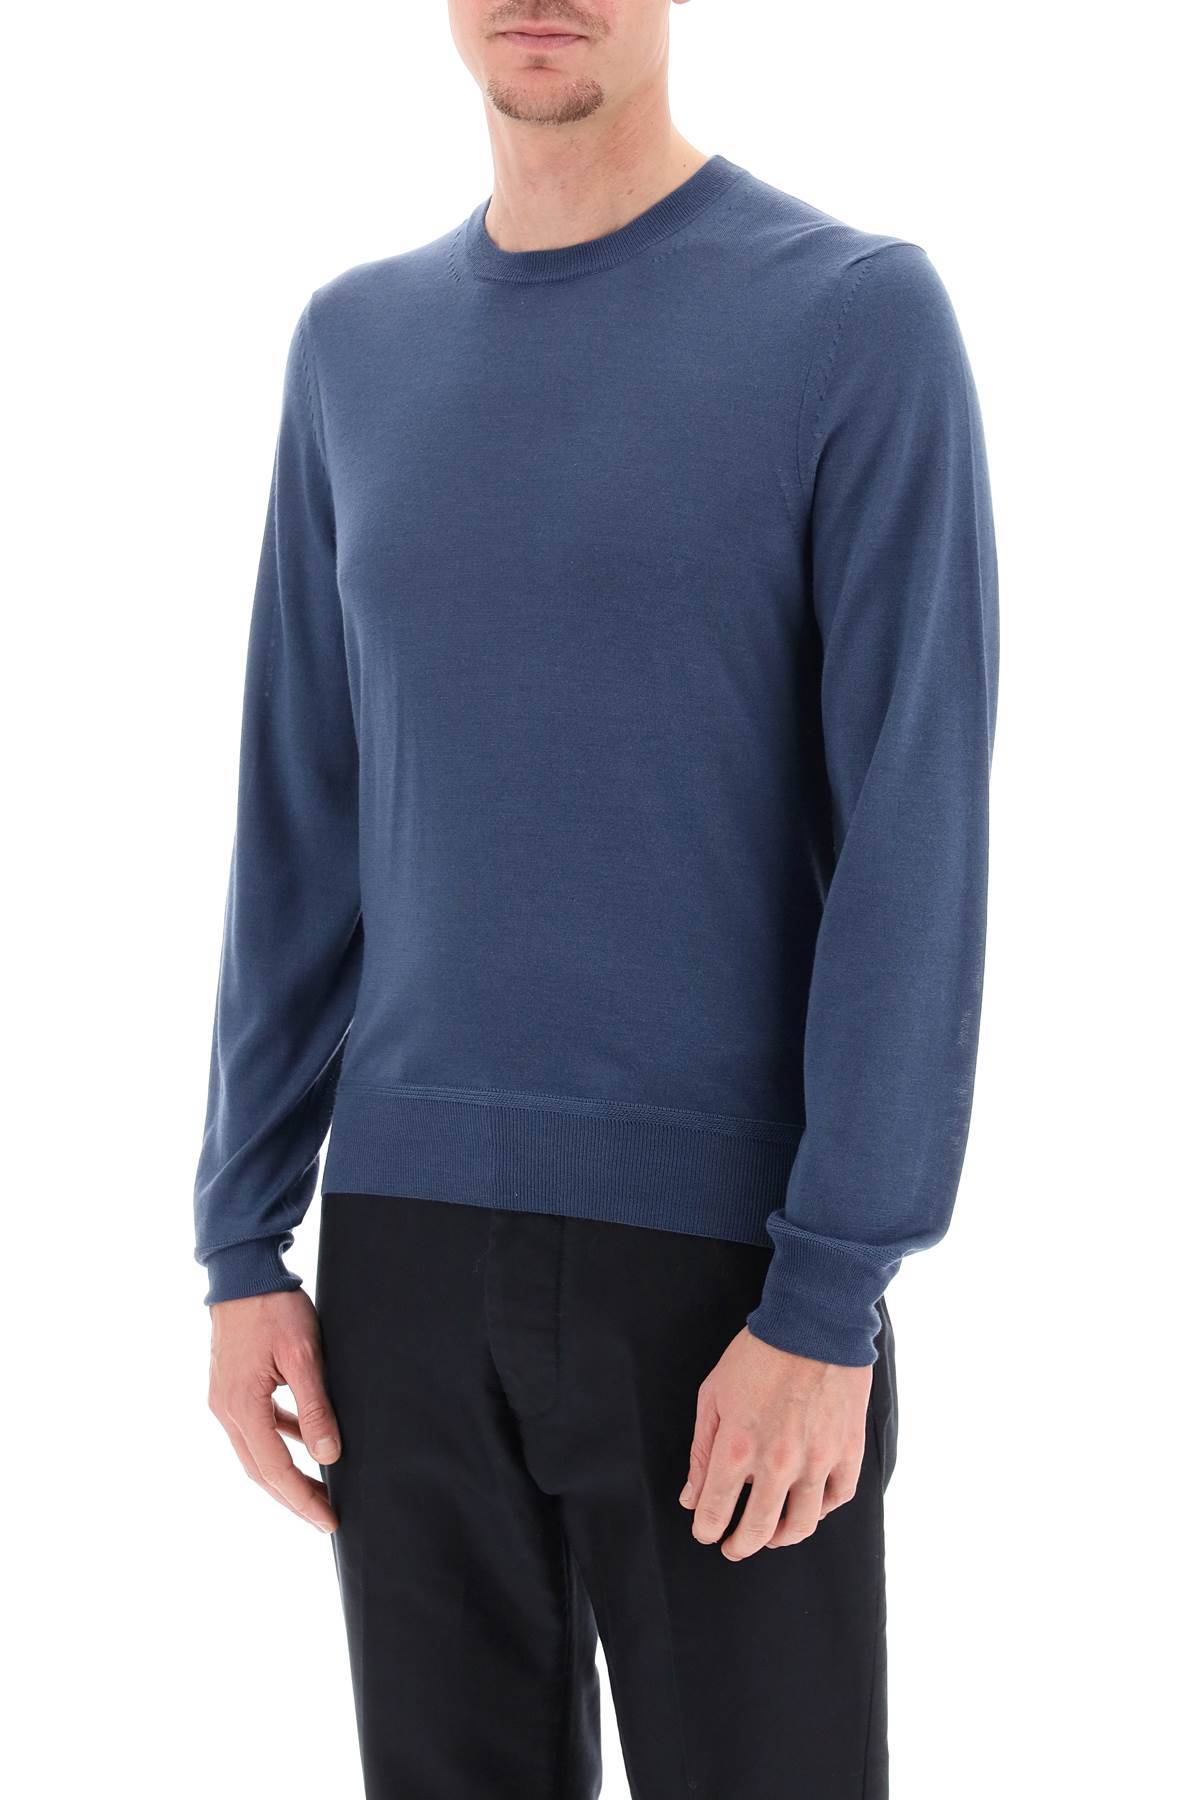 Shop Tom Ford Light Silk-cashmere Sweater In Blue